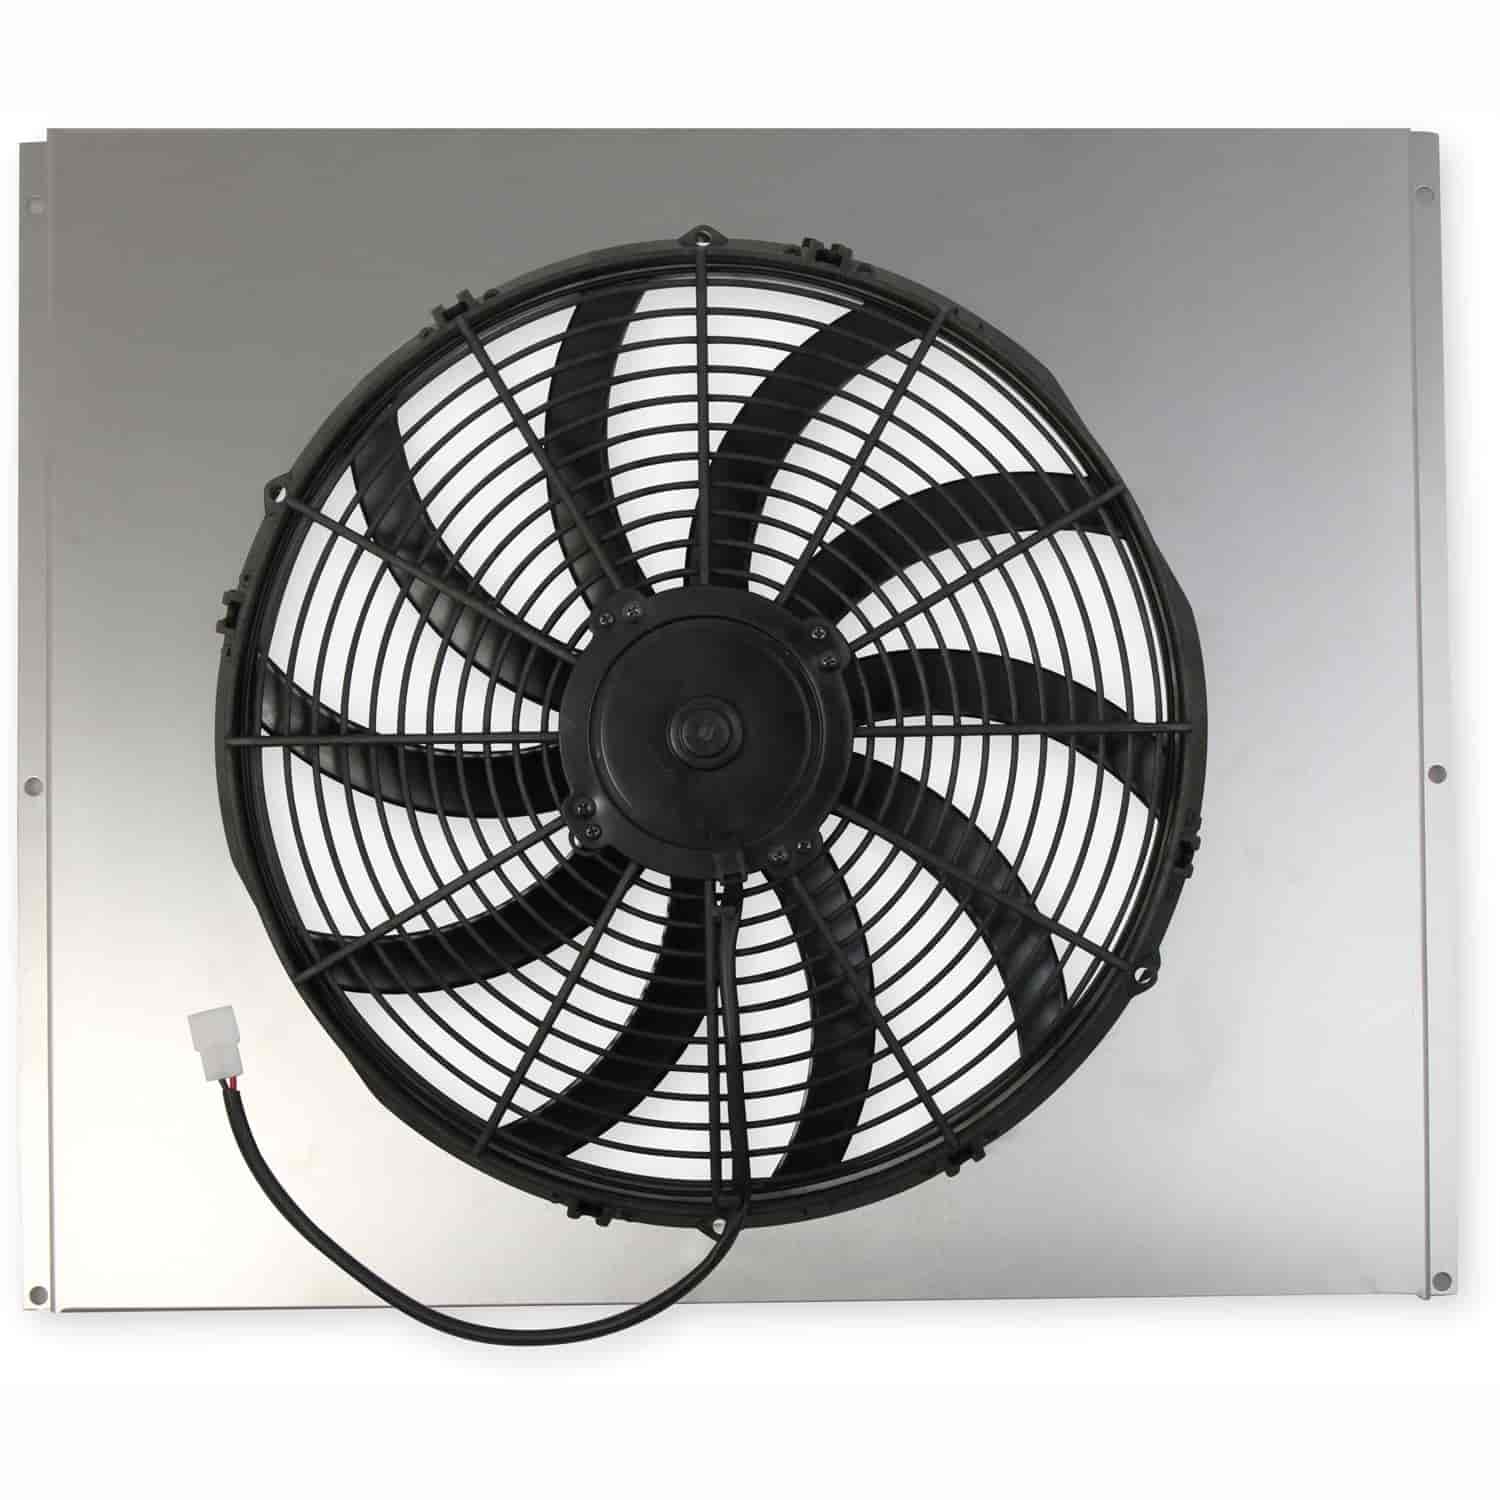 High-Performance Series Aluminum Fan and Shroud Package